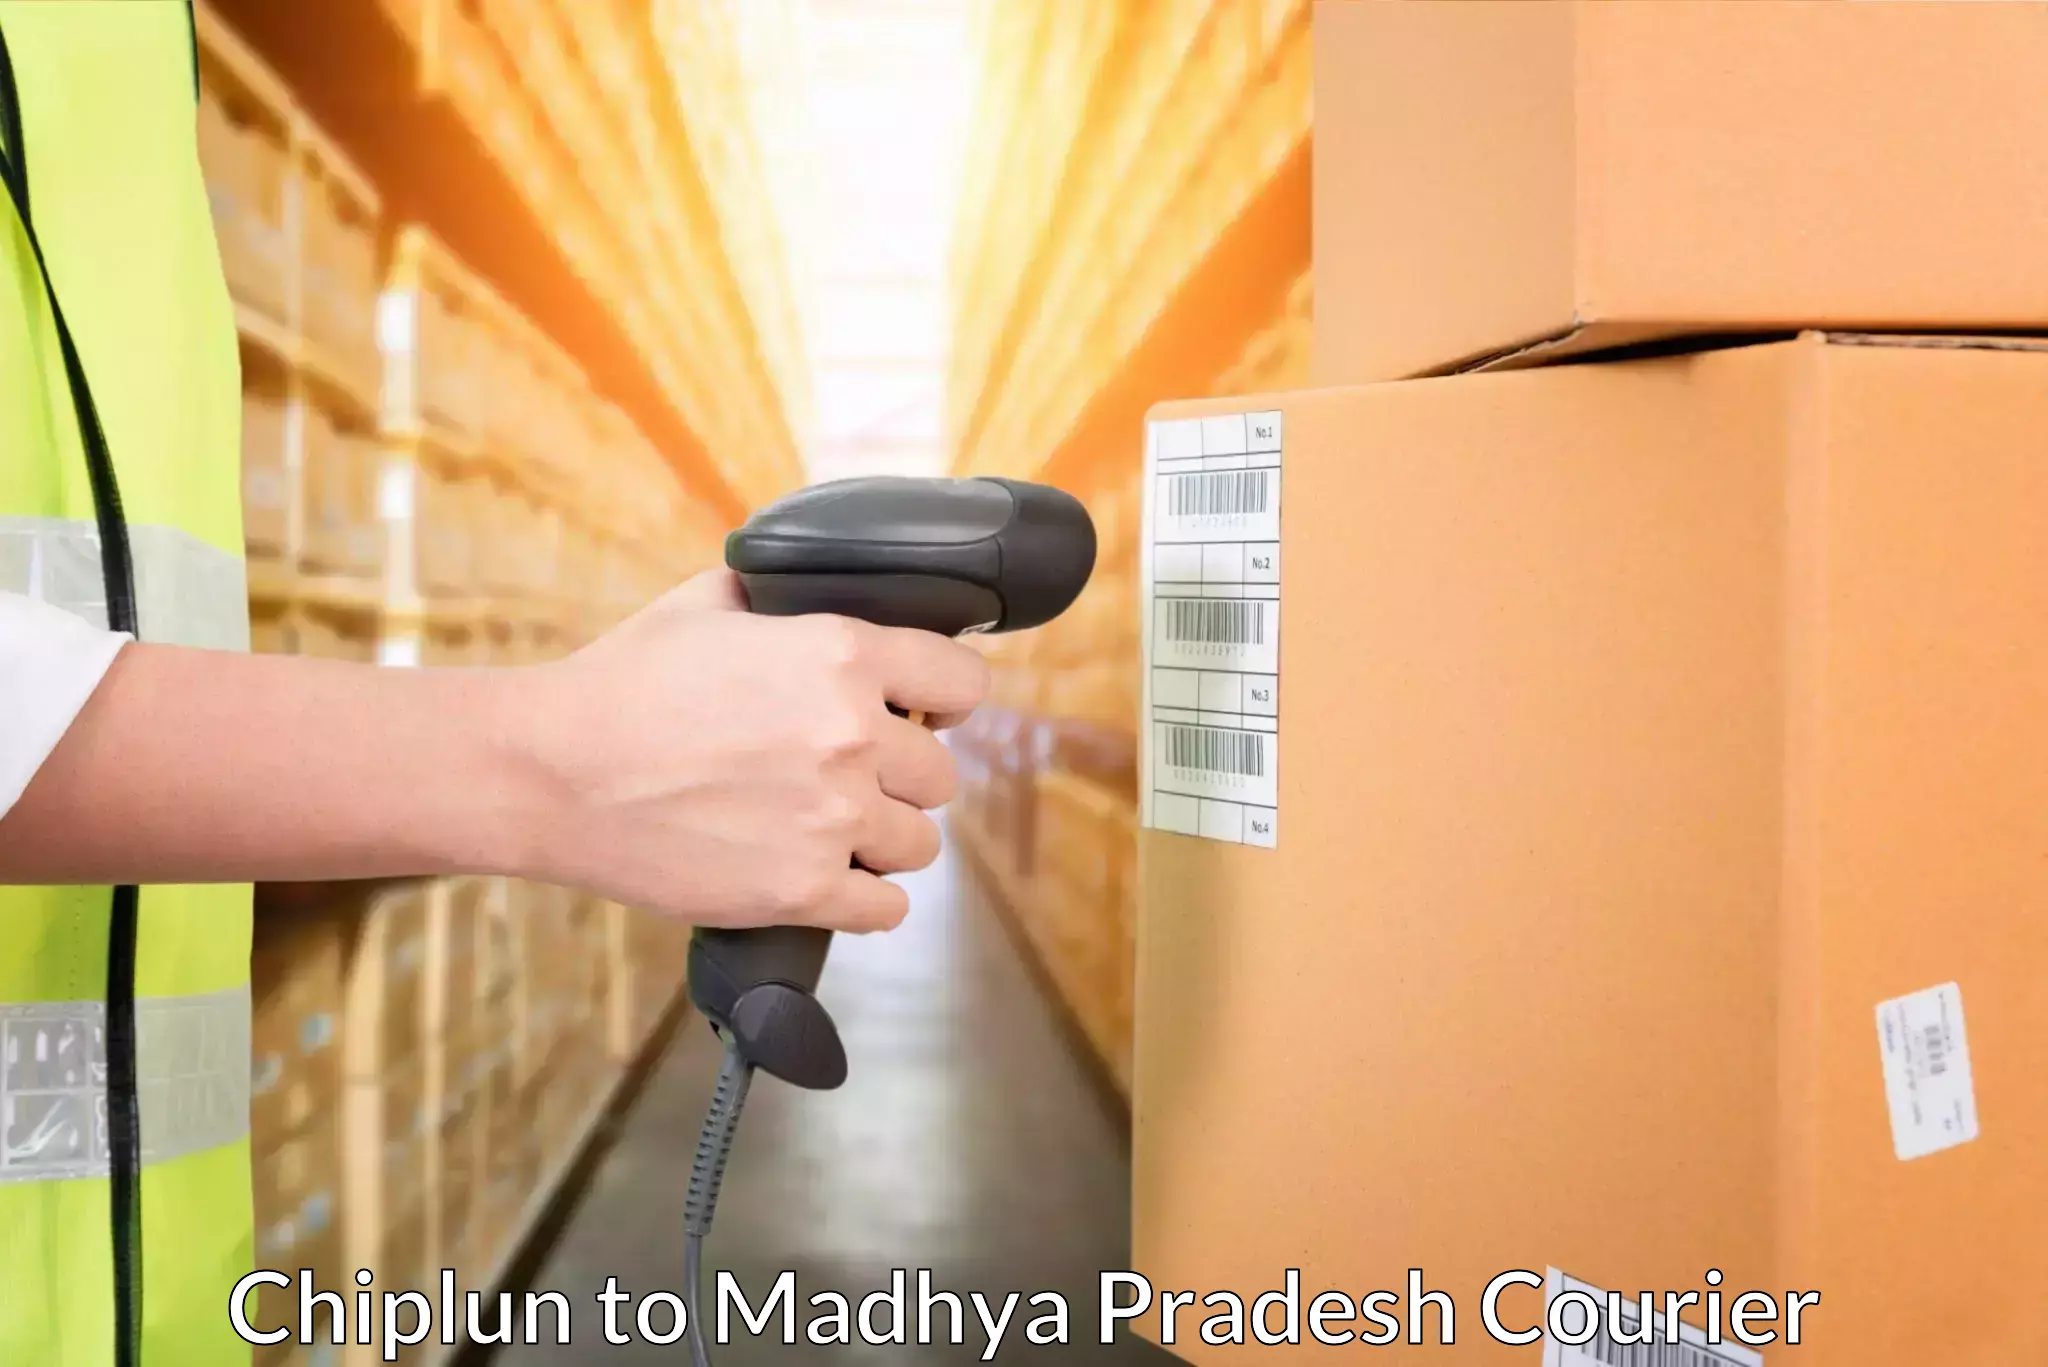 Affordable parcel service Chiplun to Madhya Pradesh